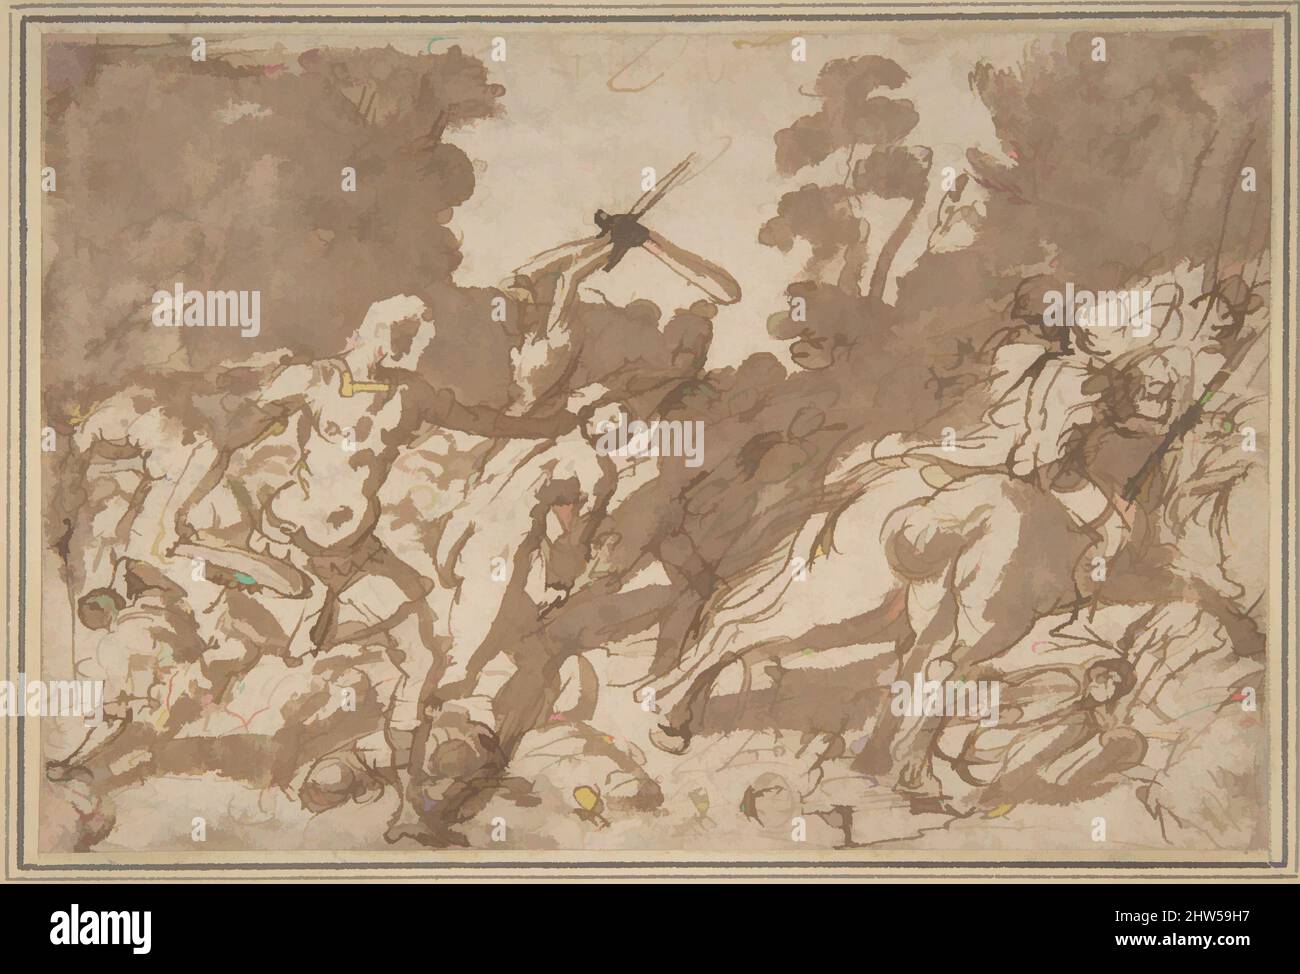 Art inspired by Battle Scene (Samson Slaying the Philistines ?), 17th century, Pen and brown ink, brush and brown wash on light brown paper, 4-15/16 x 7-1/2 in. (12.6 x 19 cm), Drawings, Anonymous, Italian, Roman-Bolognese, 17th century, Classic works modernized by Artotop with a splash of modernity. Shapes, color and value, eye-catching visual impact on art. Emotions through freedom of artworks in a contemporary way. A timeless message pursuing a wildly creative new direction. Artists turning to the digital medium and creating the Artotop NFT Stock Photo